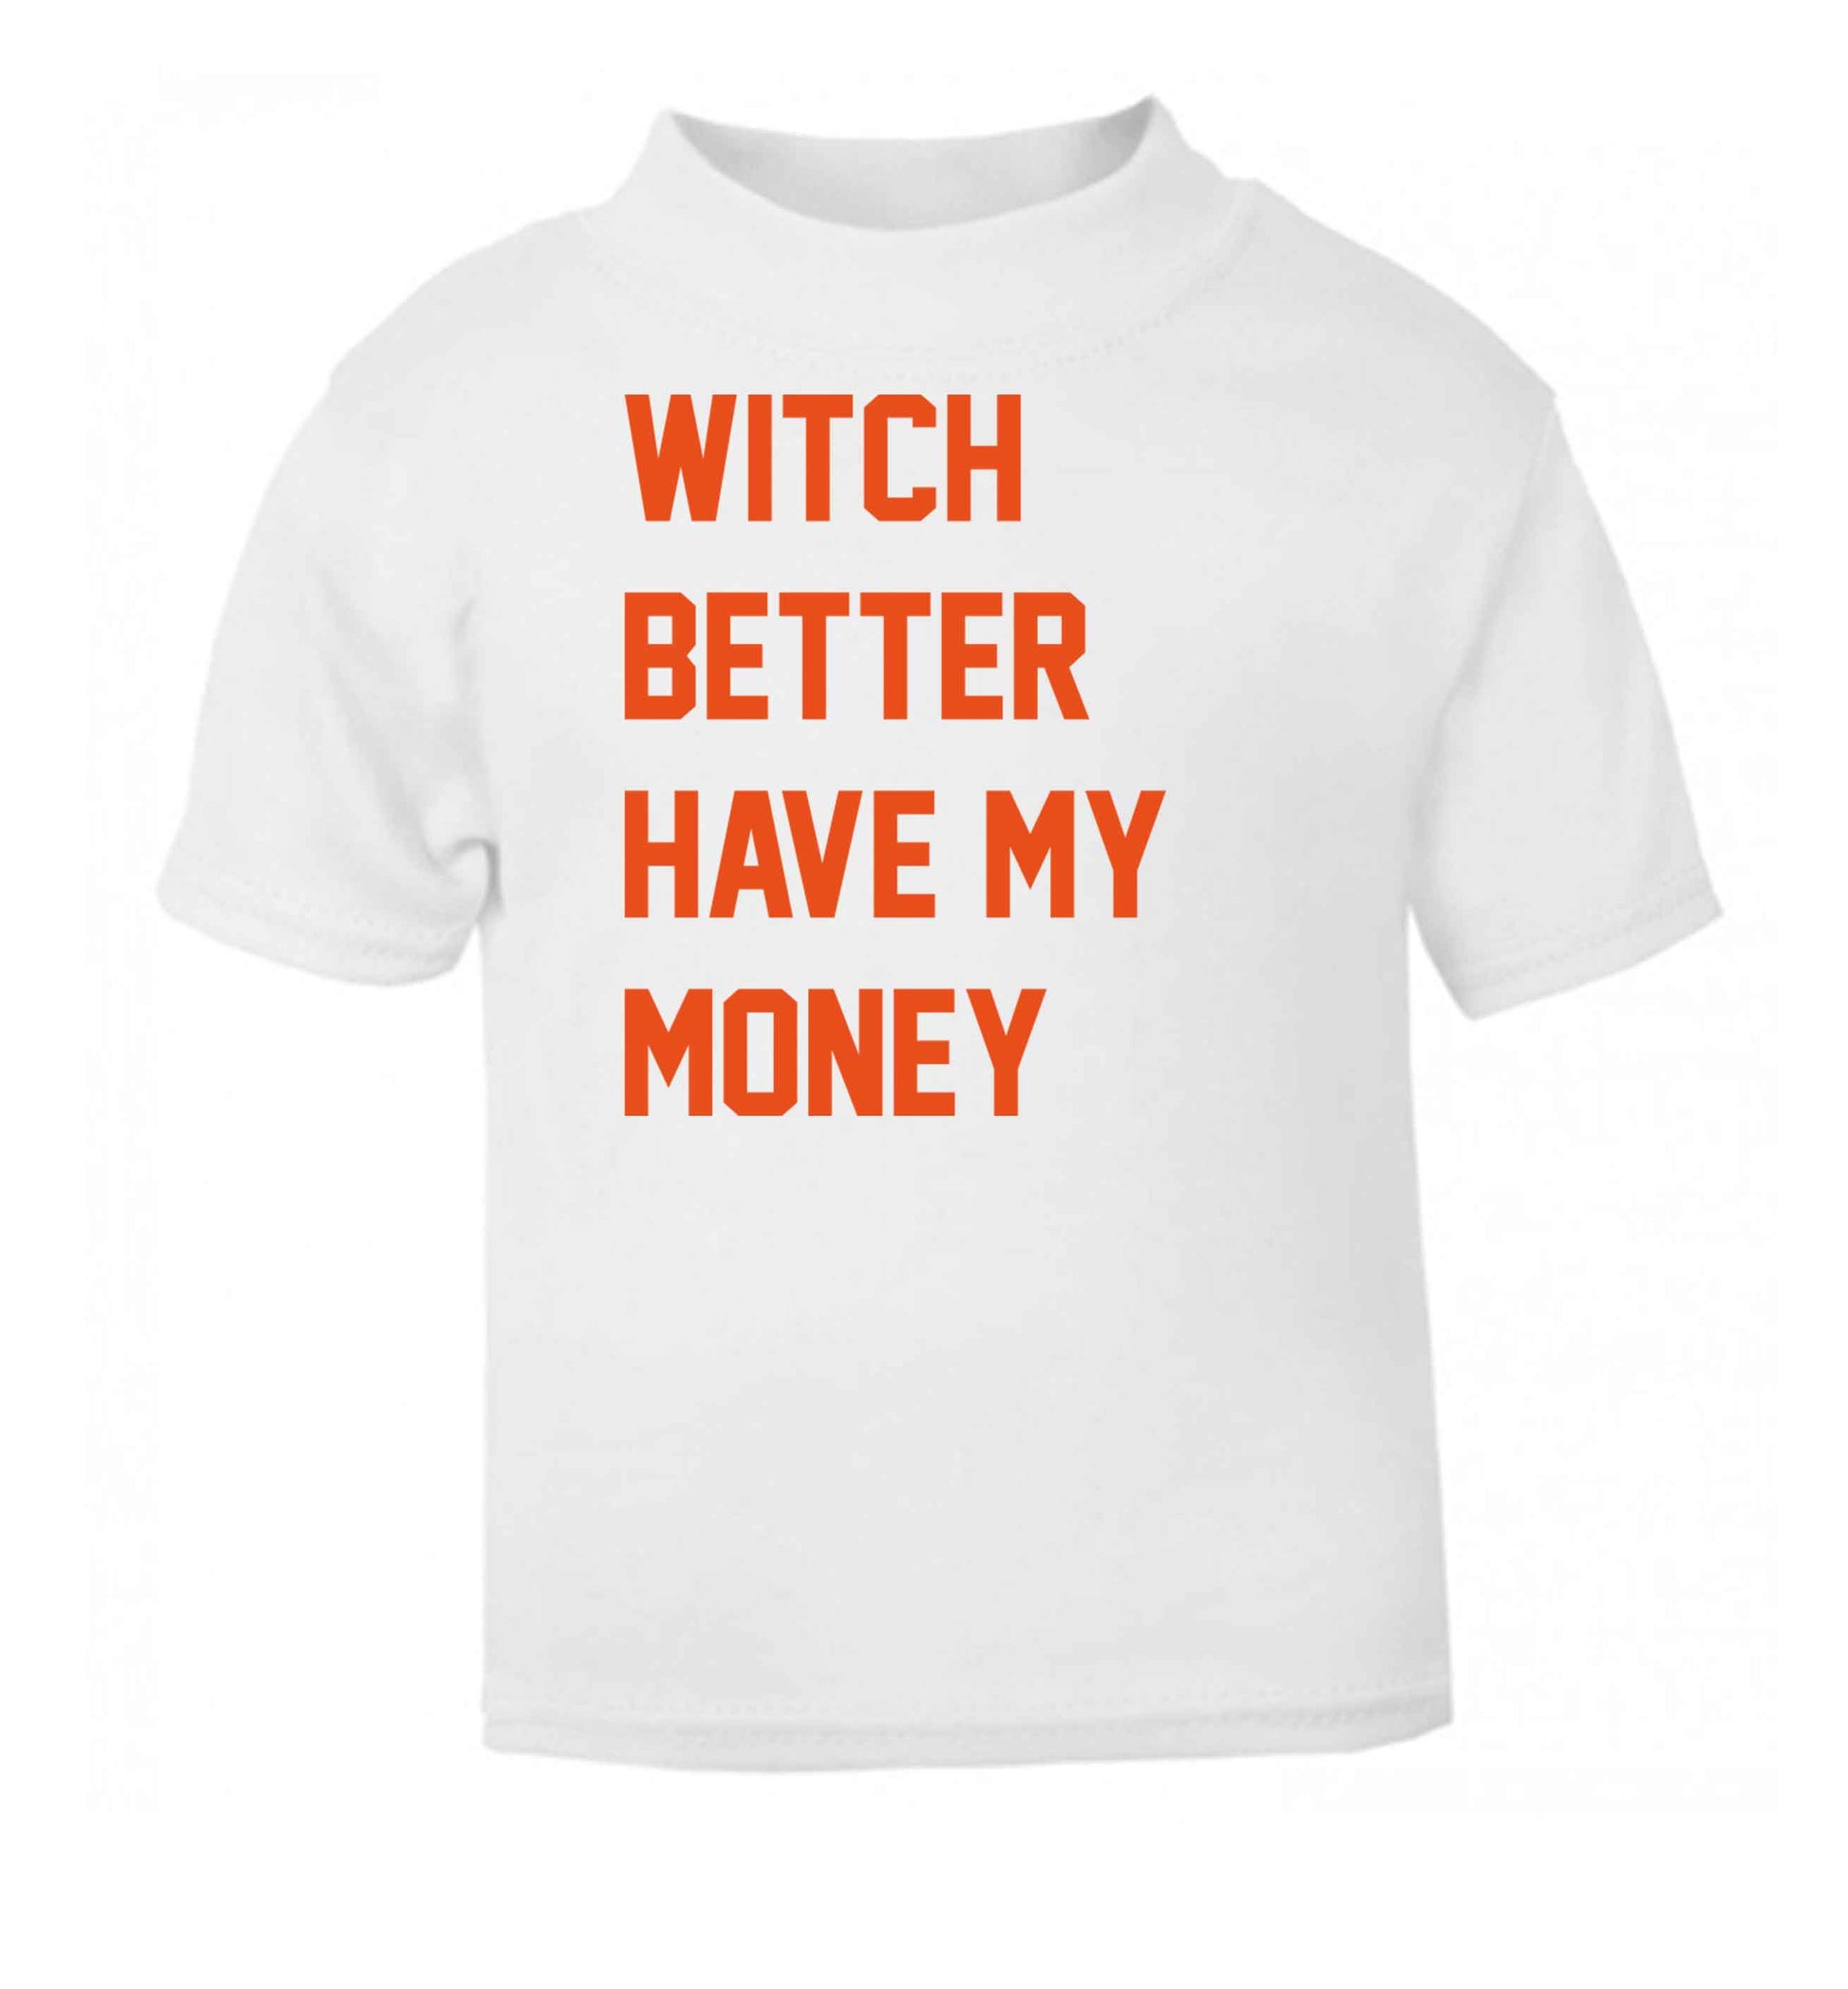 Witch better have my money white baby toddler Tshirt 2 Years